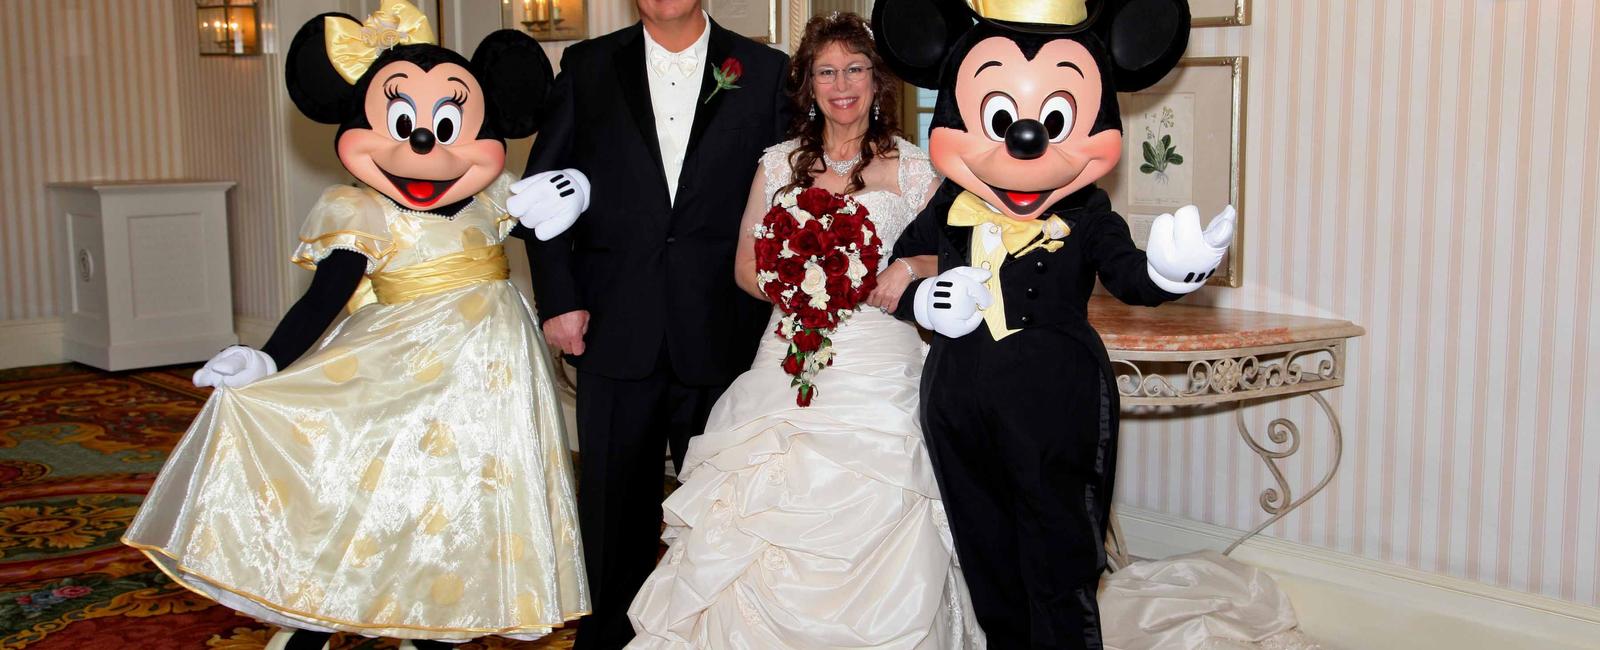 The voice actors for mickey and minnie mouse were married in real life